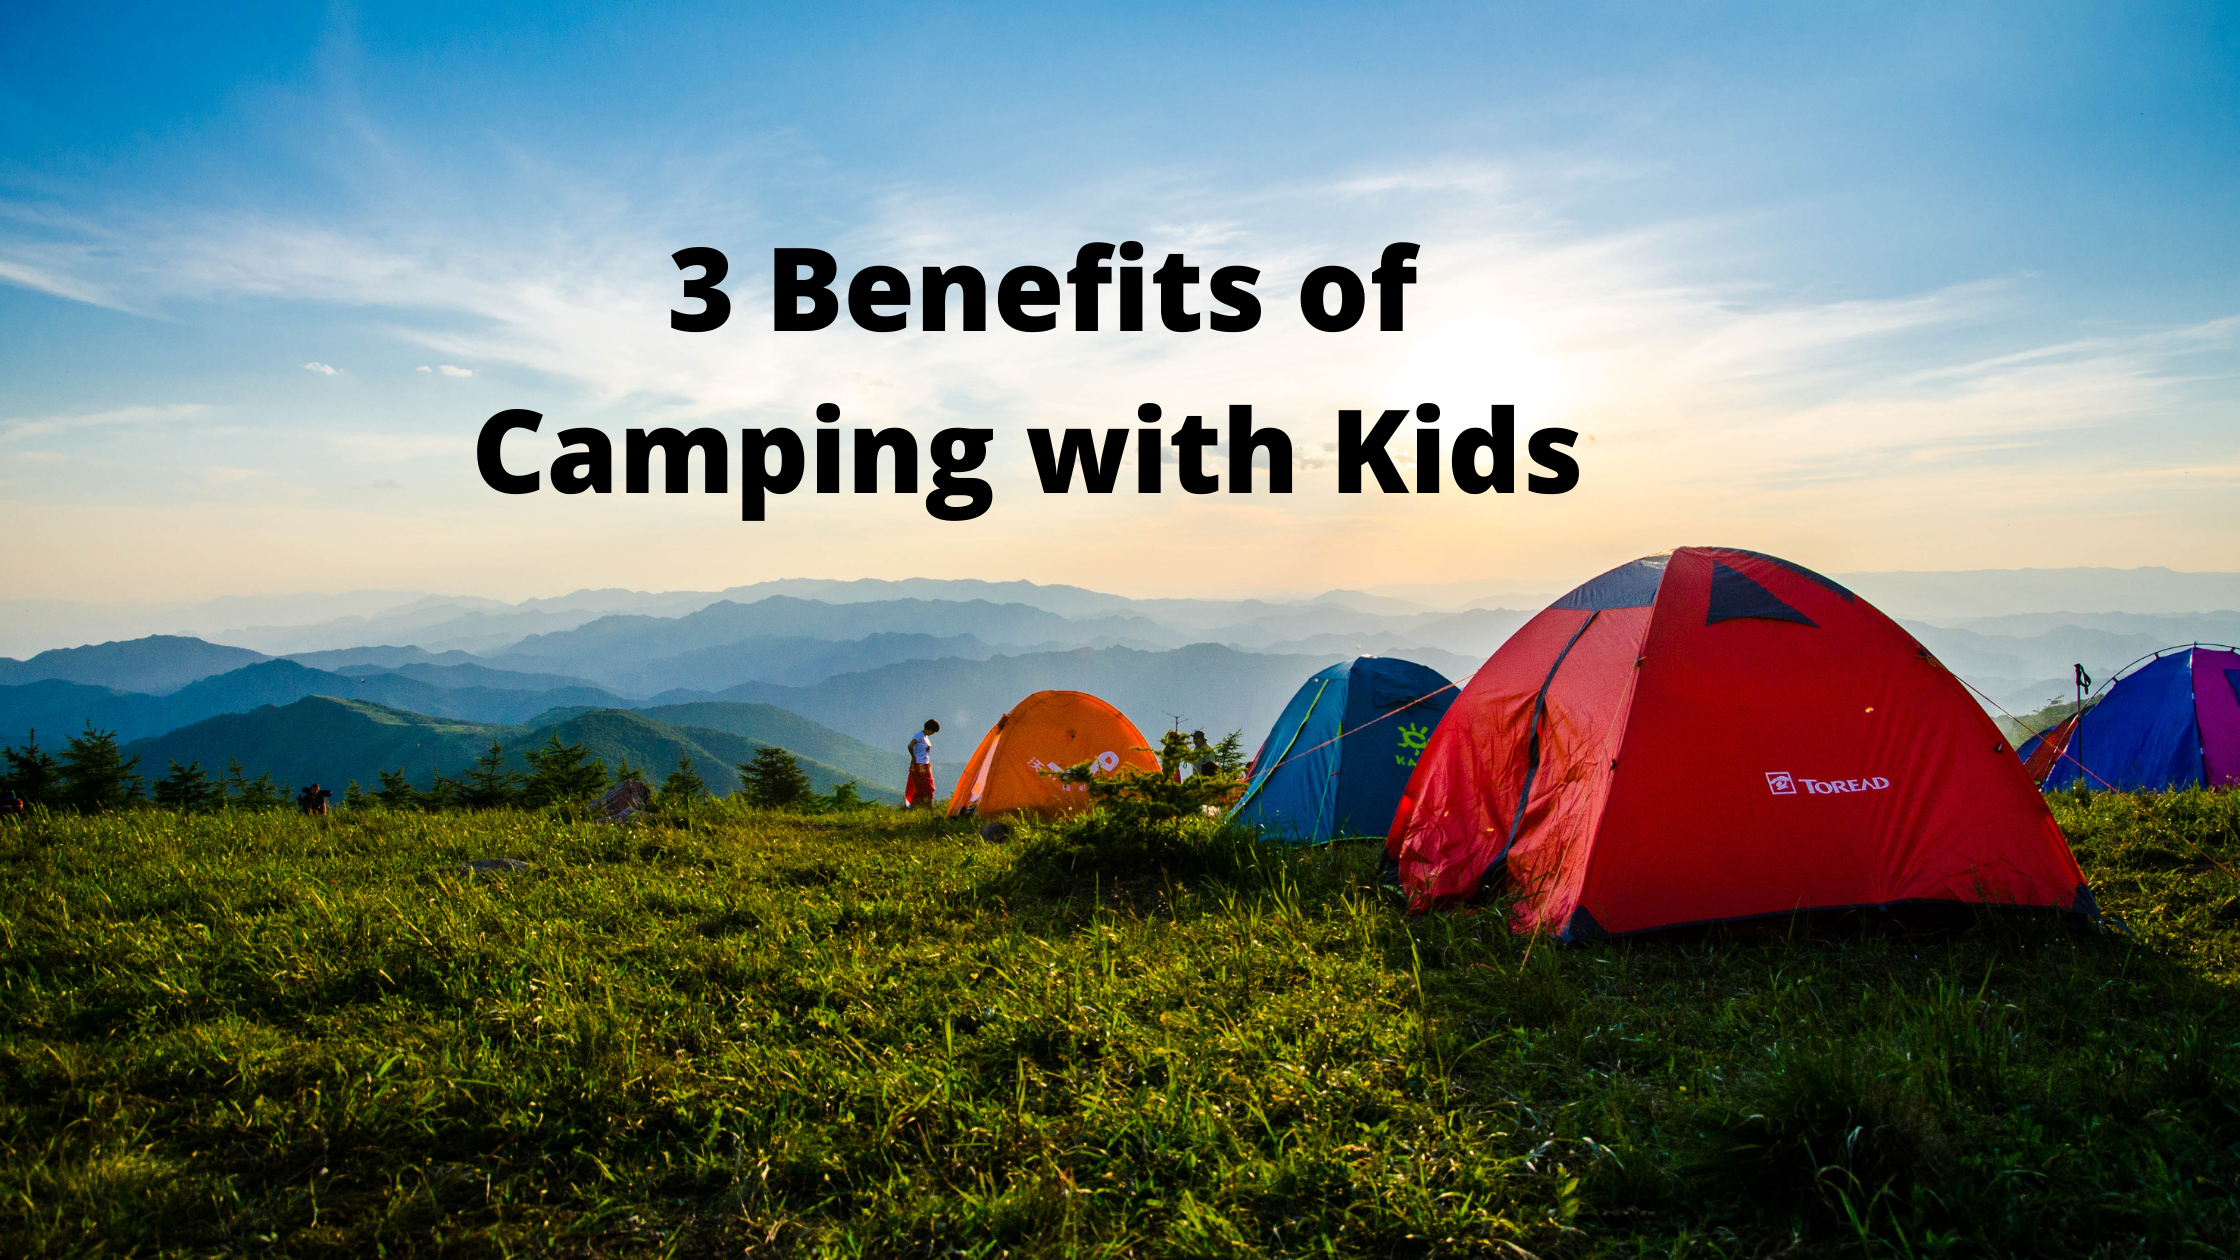 3 Benefits of Camping with Kids